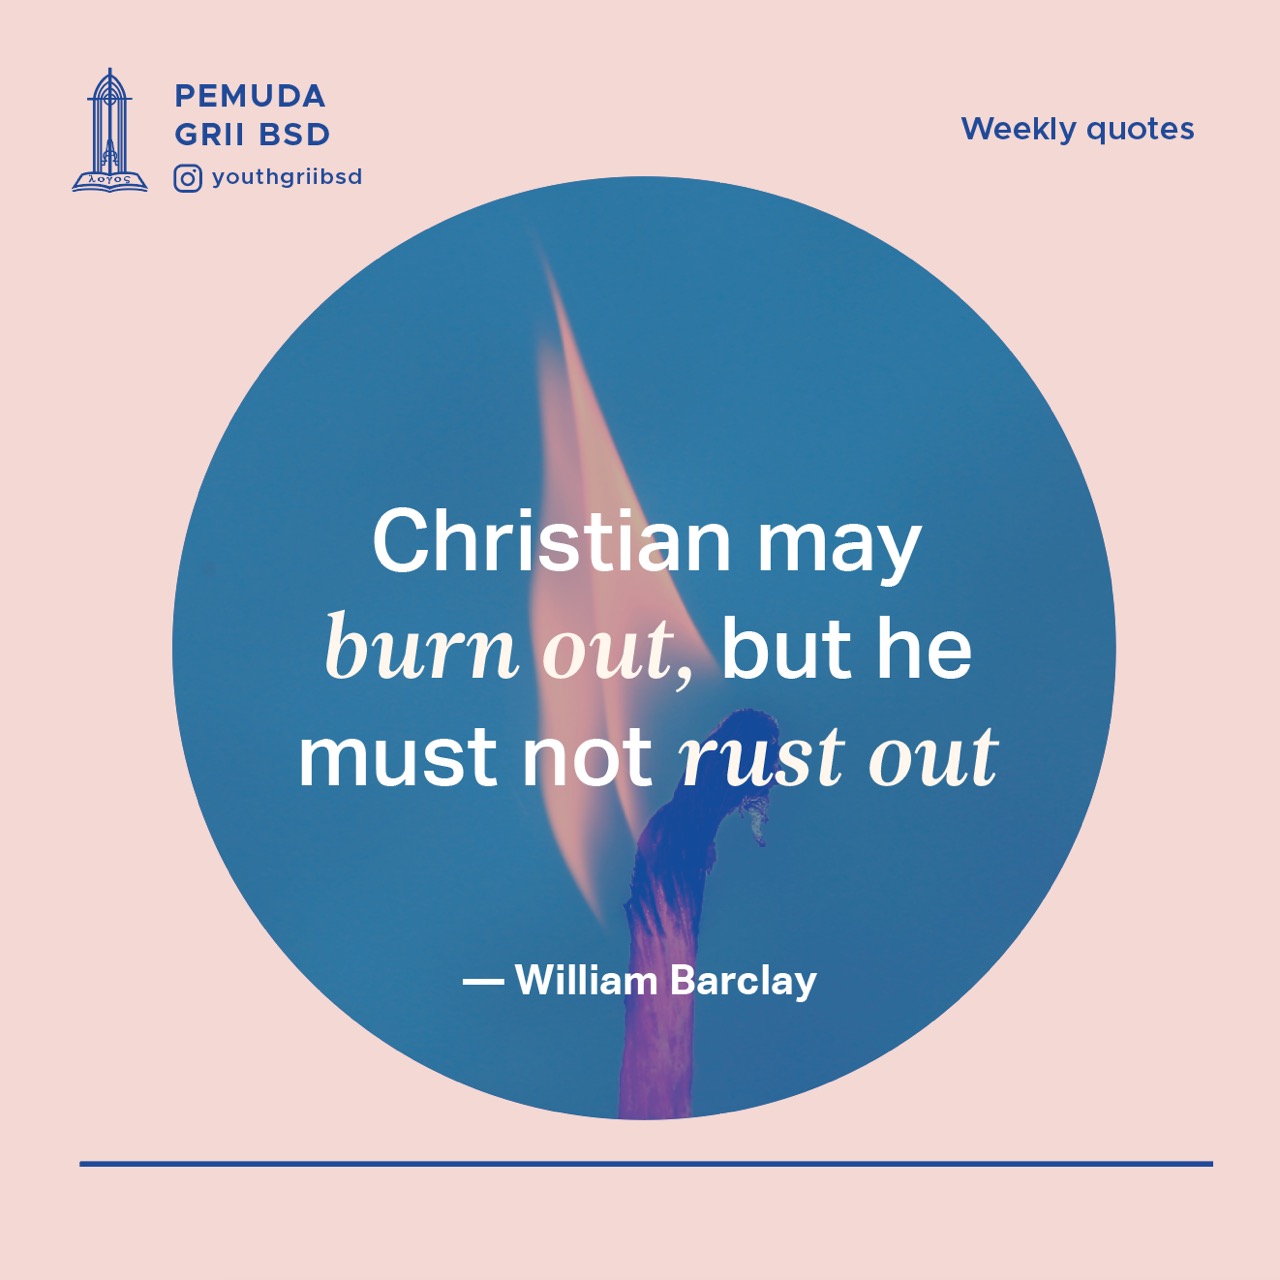 Christian may burn out, but he must not rust out.